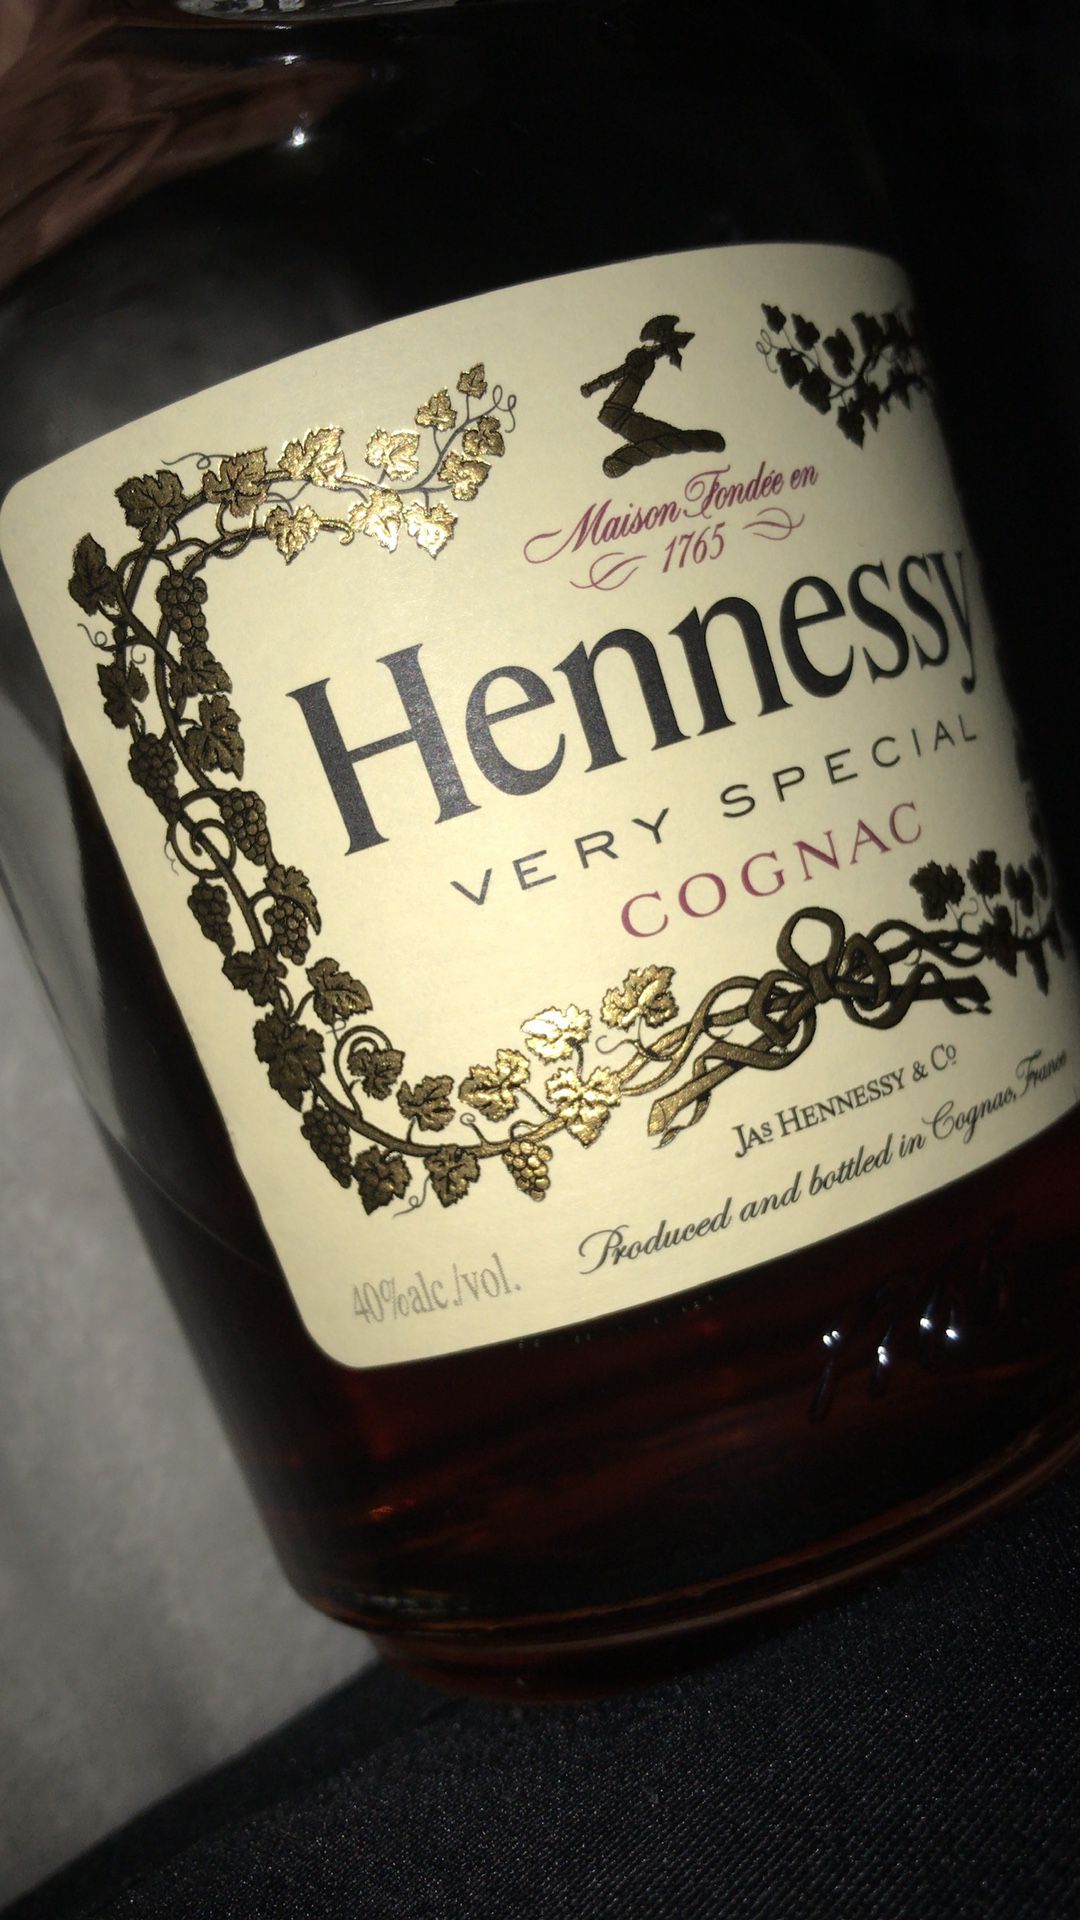 Henessy bottle picture signed by owner